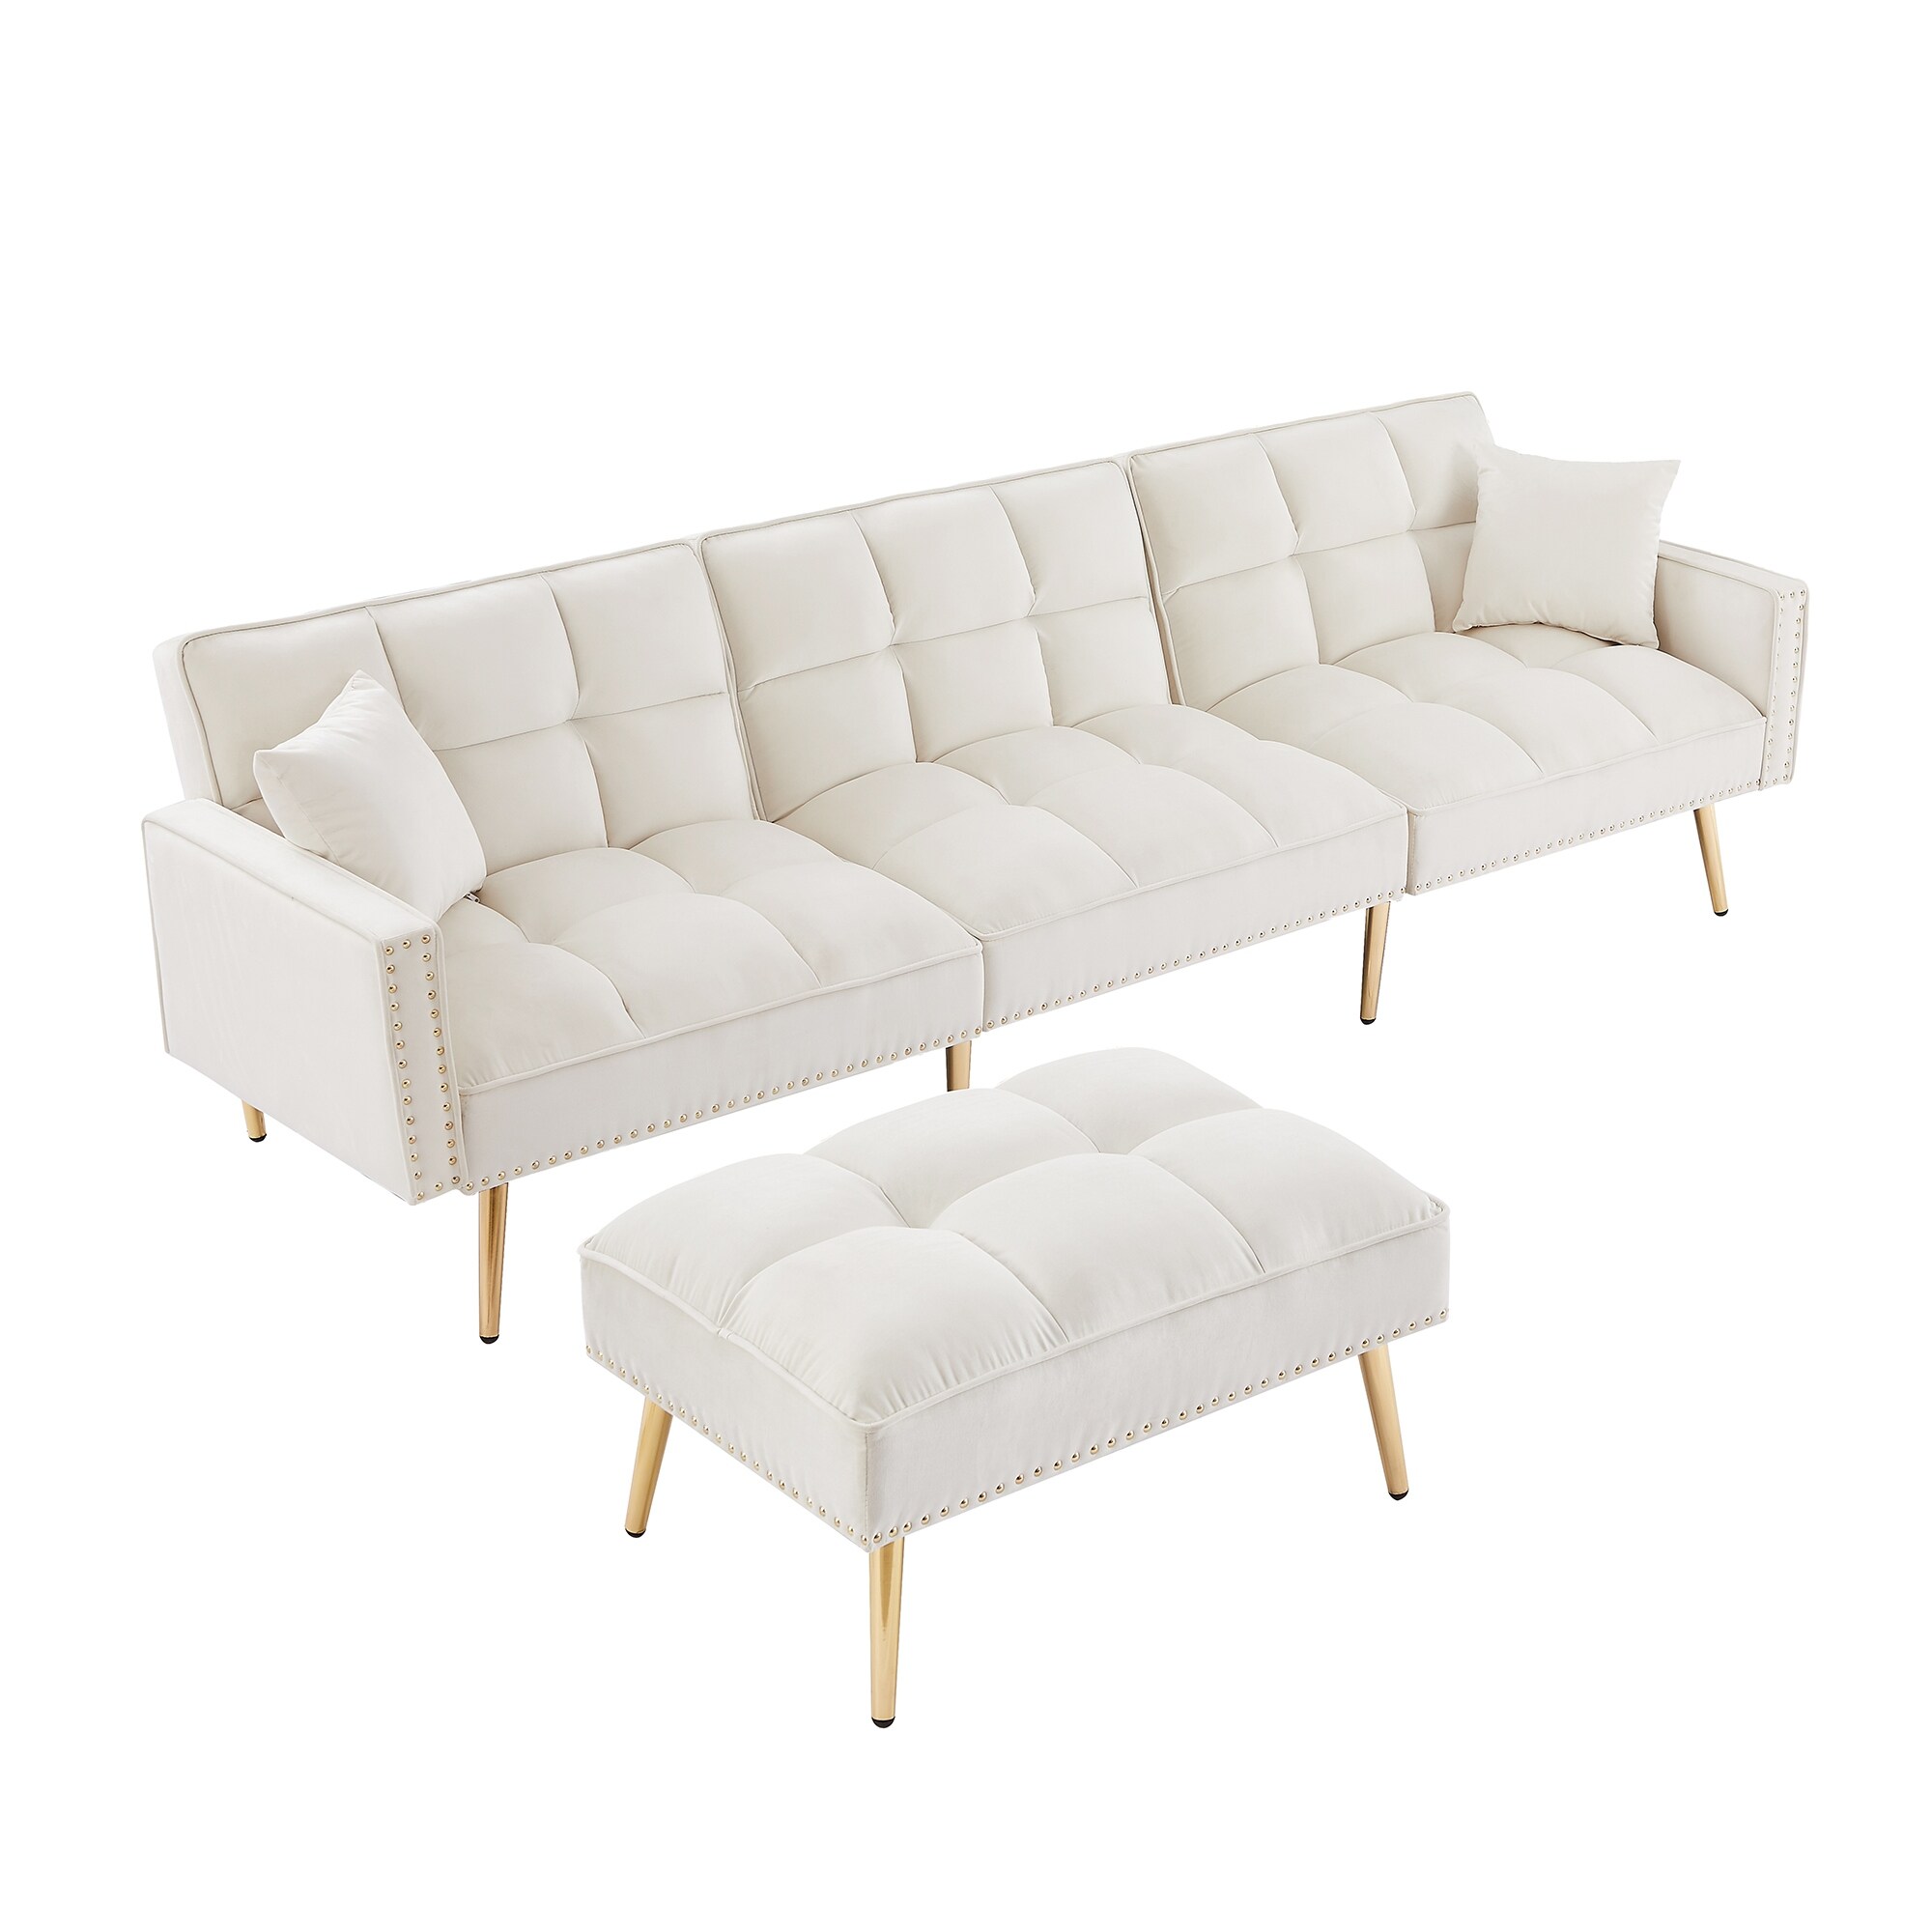 Modern Velvet Upholstered Reversible Sectional Sofa Bed , L-Shaped Couch with Movable Ottoman For Living Room.